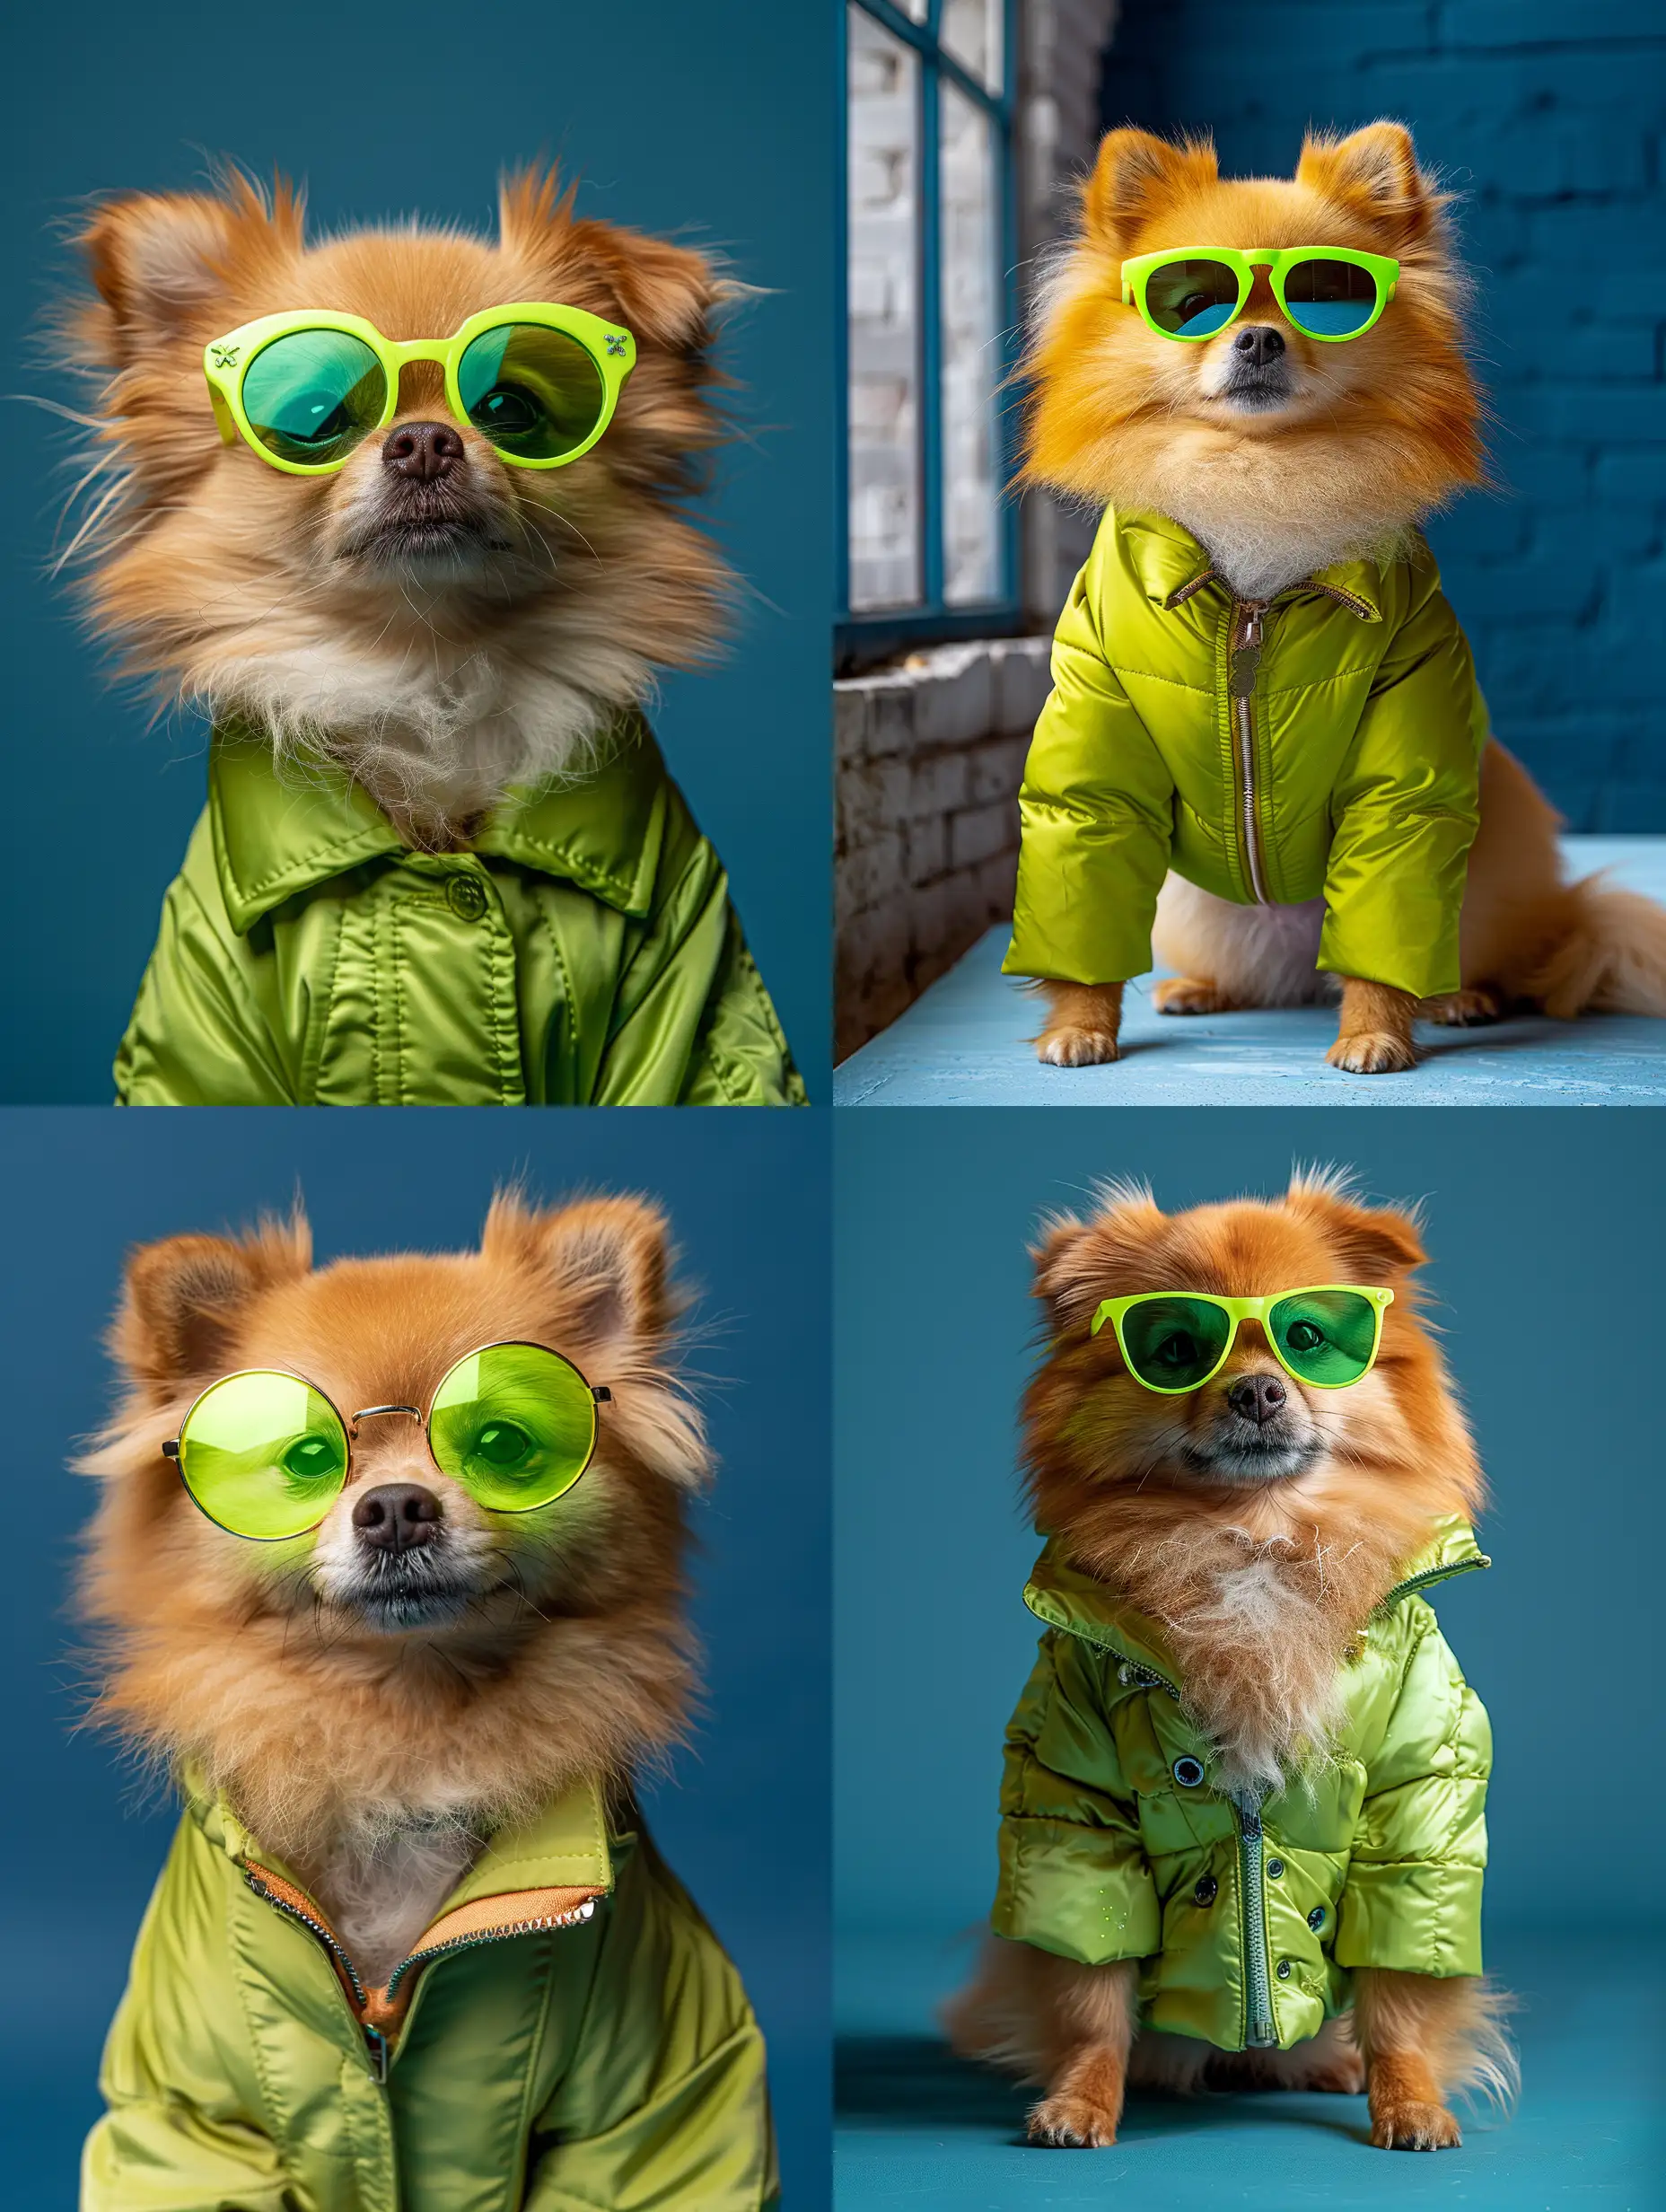 Pomeranian-Dog-in-1960s-SpaceAge-Fashion-against-Deep-Blue-Background